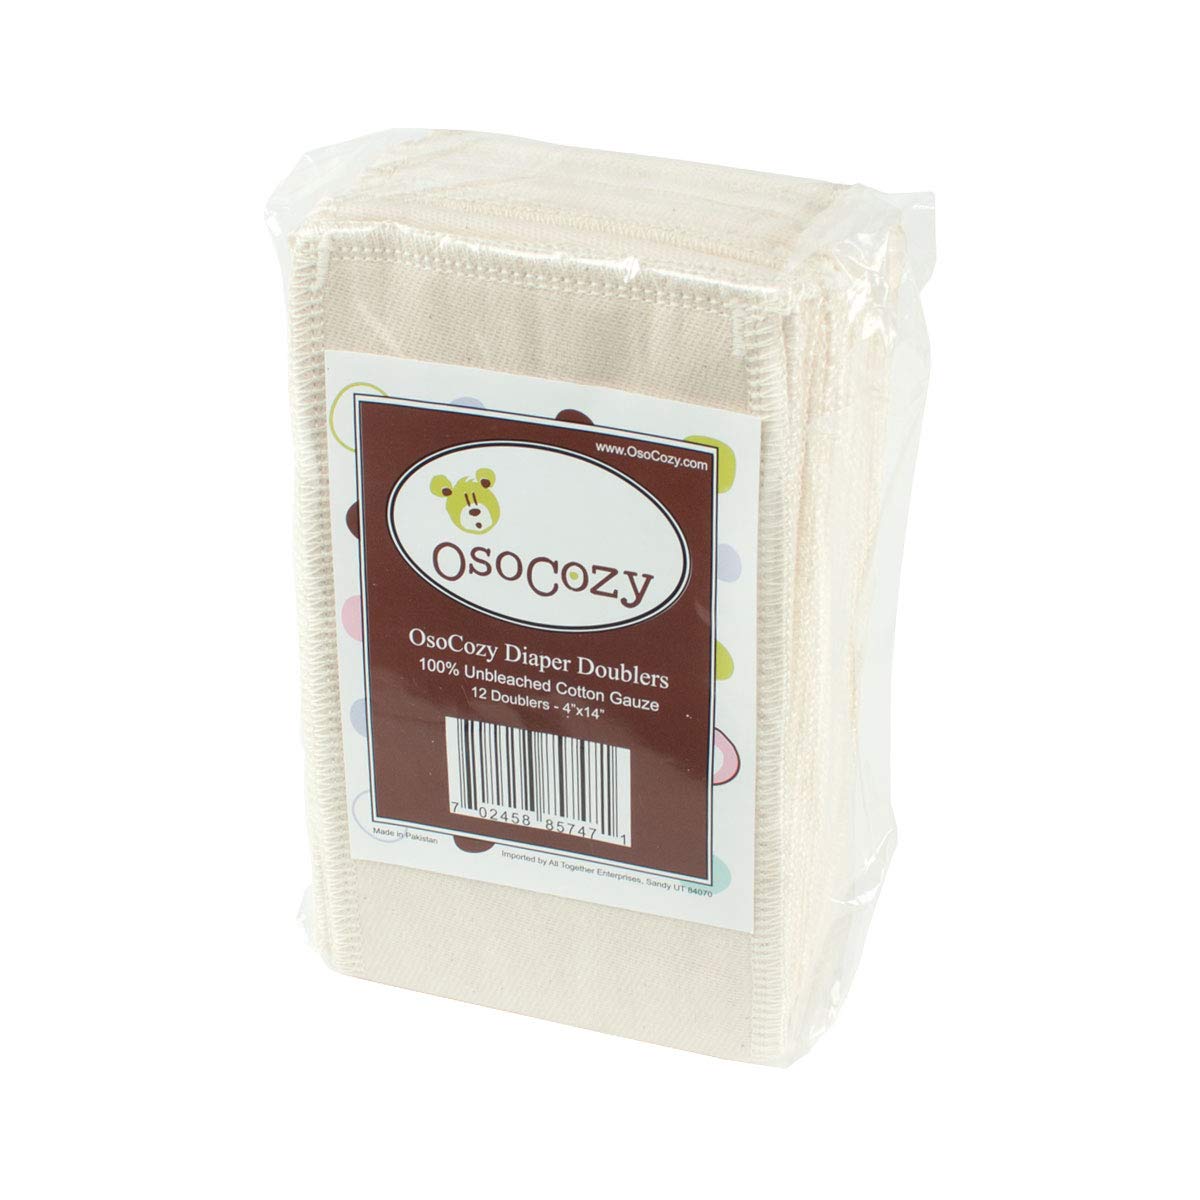 OsoCozy Gauze Cloth Diaper Doublers - 100% Unbleached Gauze Weaved Cotton, 4x12 inches, 6 Layers Thick. Add Extra Absorbency to Your Cloth Diapers - 12 Pack